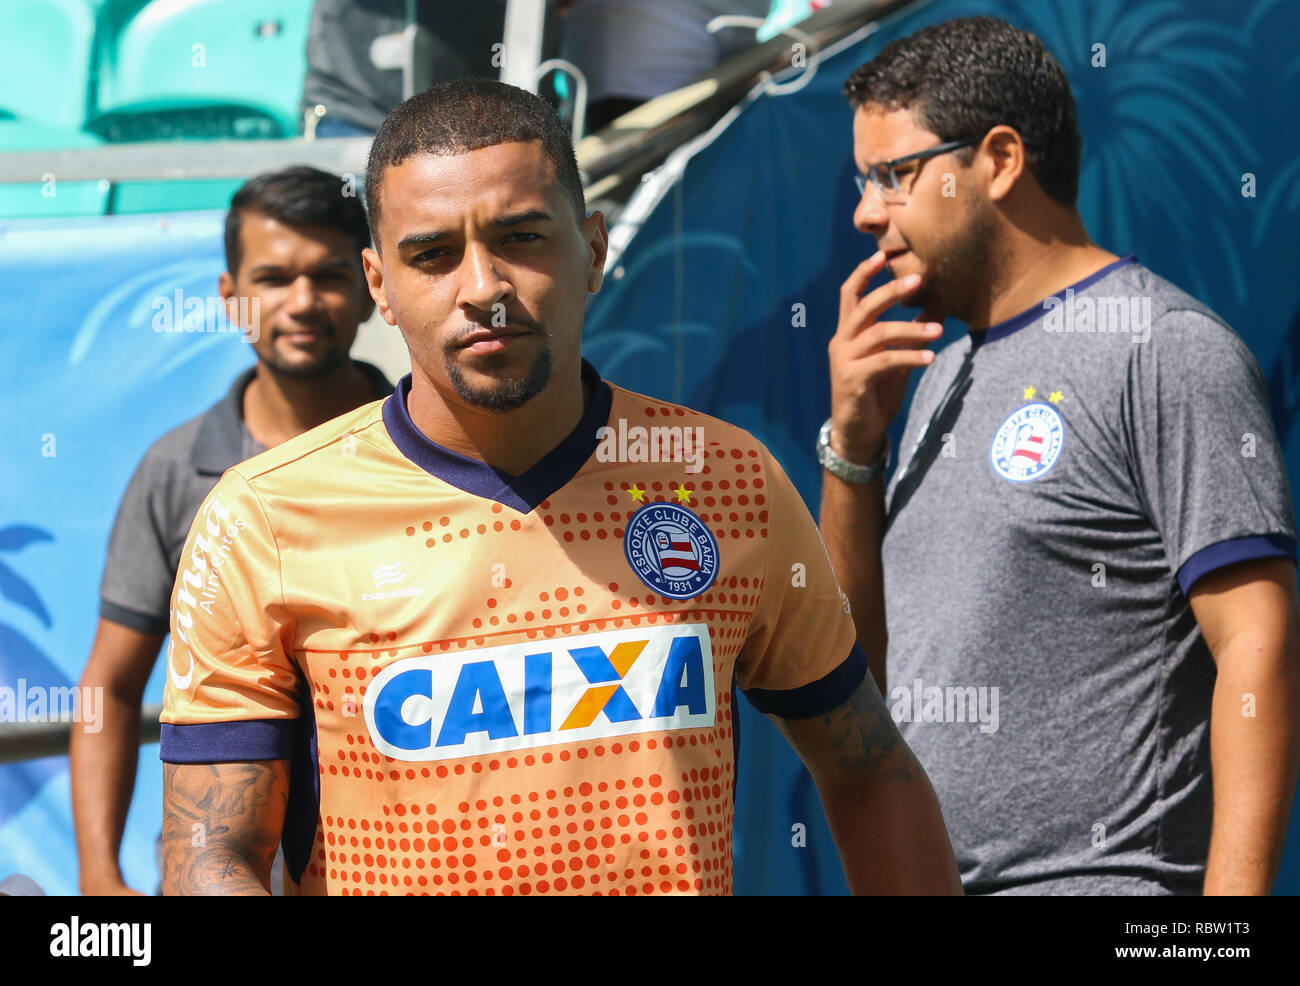 Salvador, Brazil. 12th Jan, 2019. Gregore, a player from Bahia, during a training session held on Saturday (12) at the Fonte Nova Arena in Salvador, Bahia. Credit: Tiago Caldas/FotoArena/Alamy Live News Stock Photo